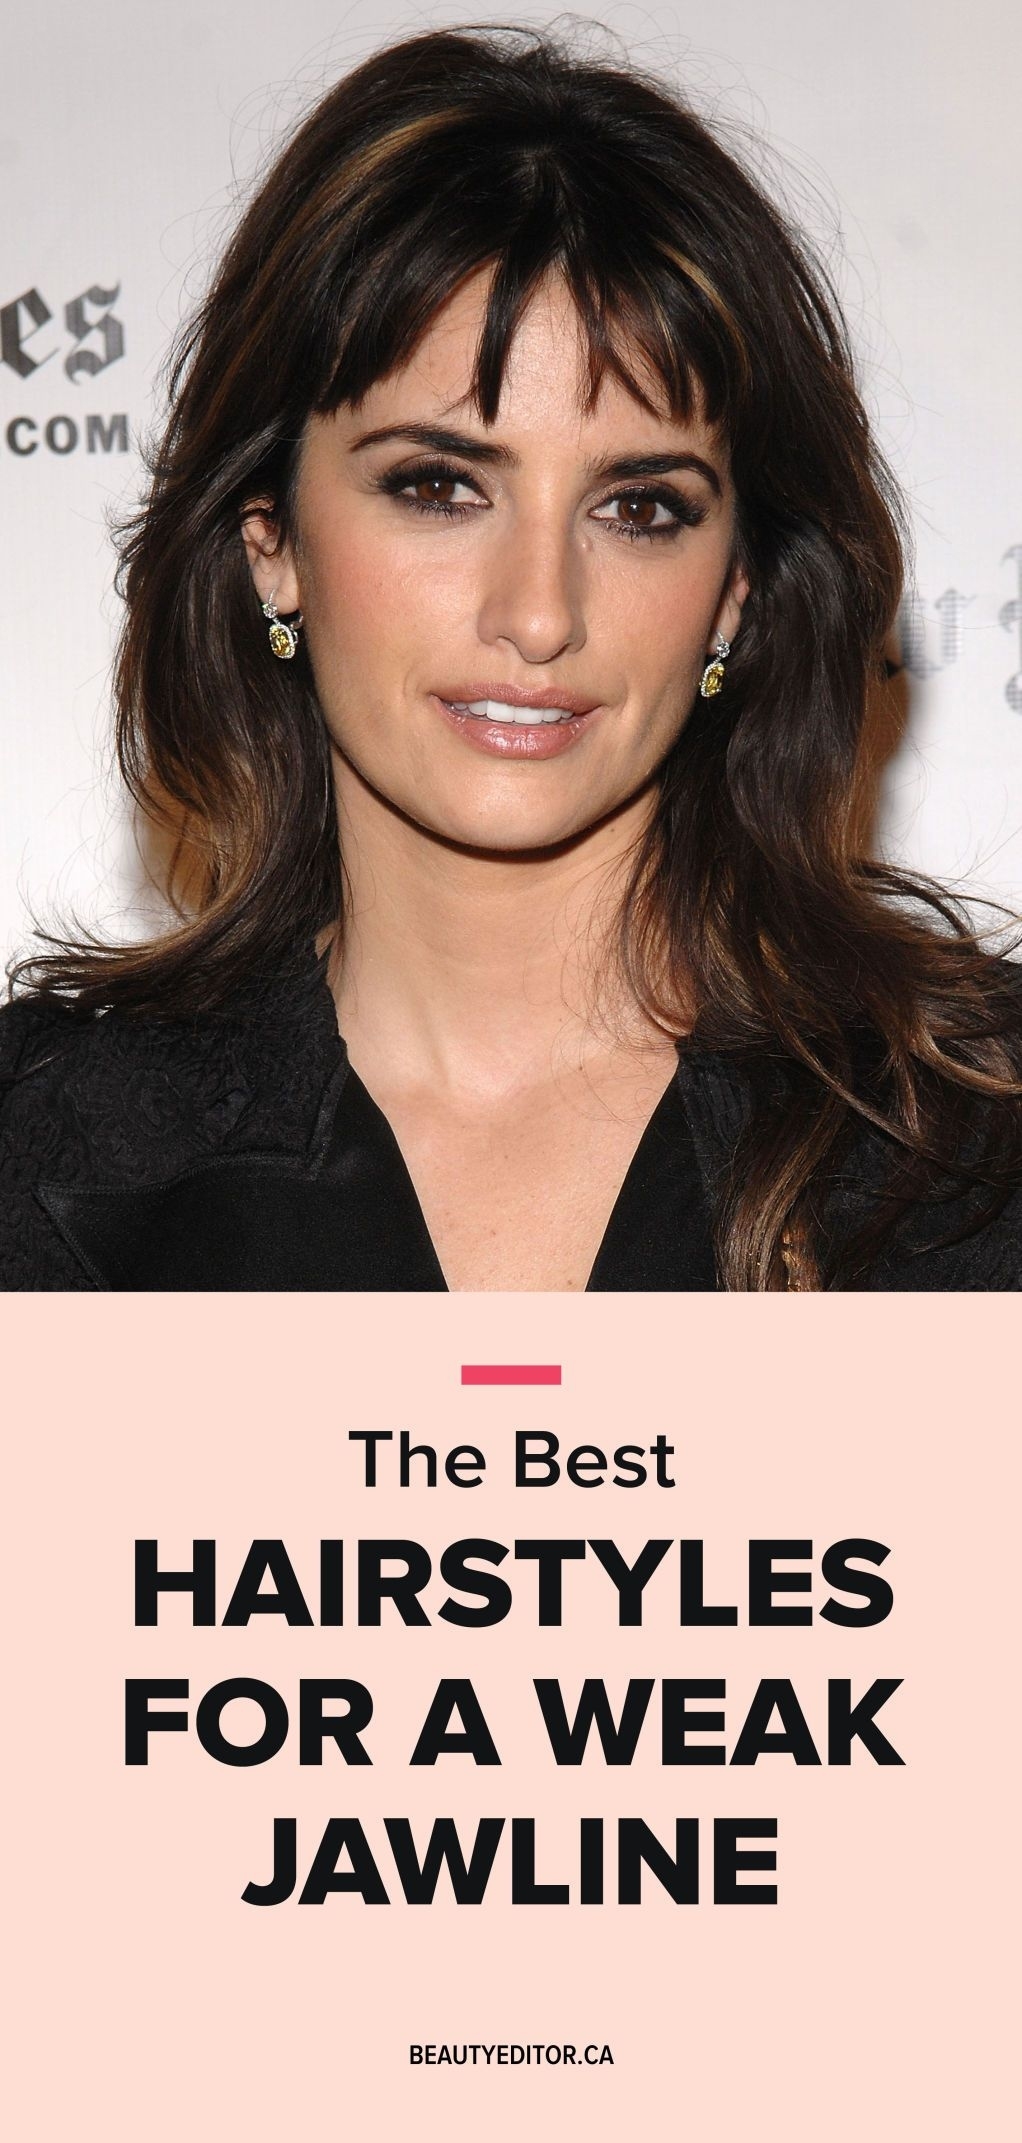 The Best Hairstyles For A Weak Jawline | Hair, Beauty with Hairstyles For A Weak Chin